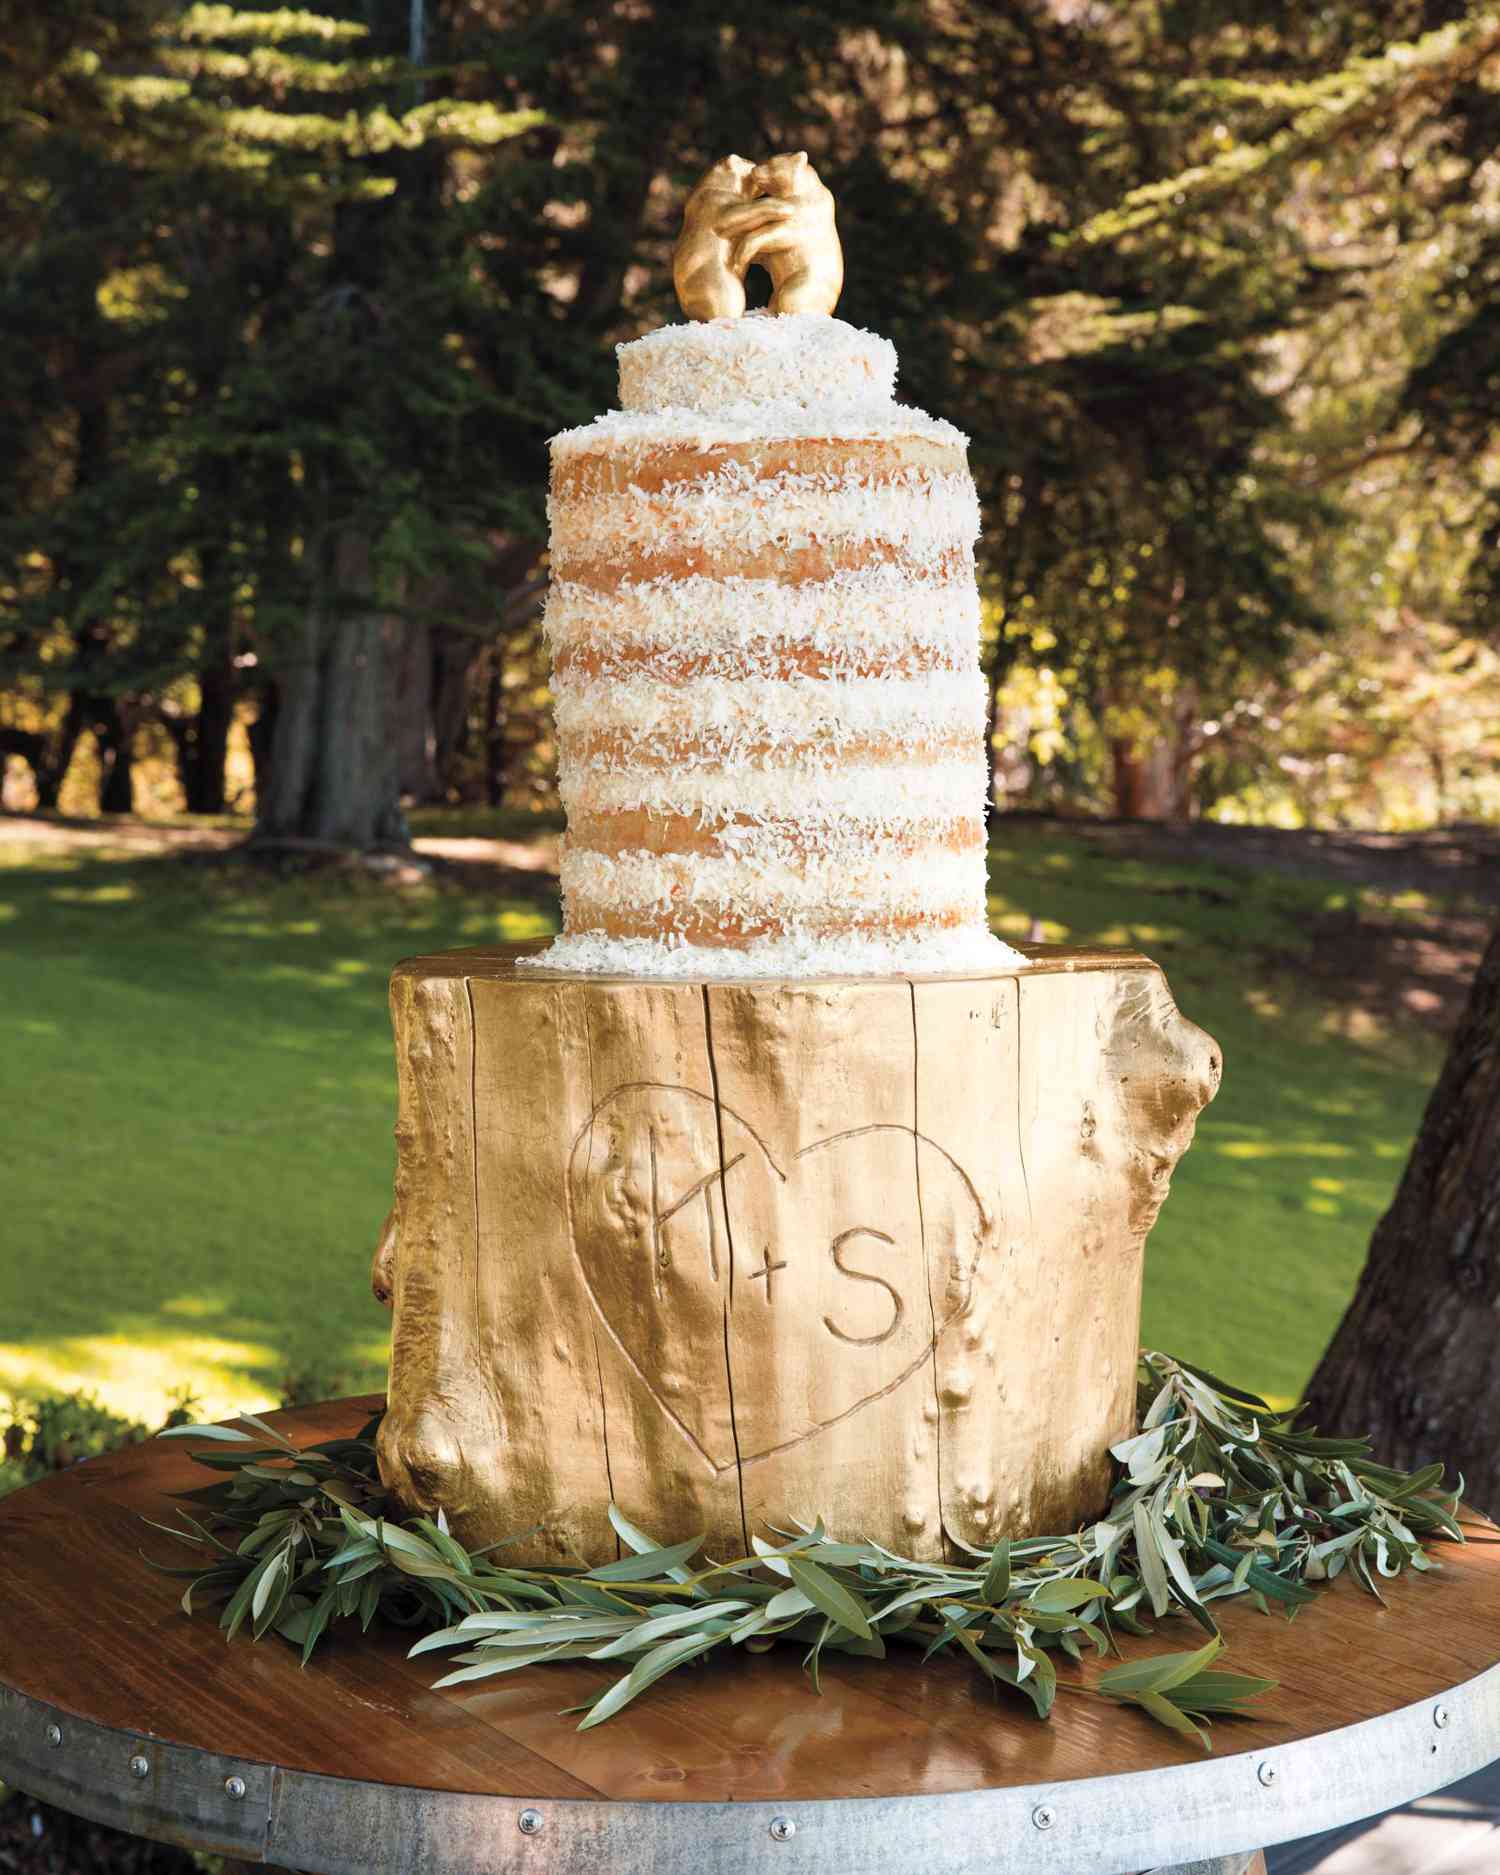 <p>The cream cheese&ndash;frosted coconut cake was topped by dancing bears that baker Robin Redding gilded with 18-karat gold leaf. It was placed on a "cake stand" (now a side table in the newlyweds' home) that the baker's boyfriend fashioned from a fallen Monterey Pine.</p>
                            